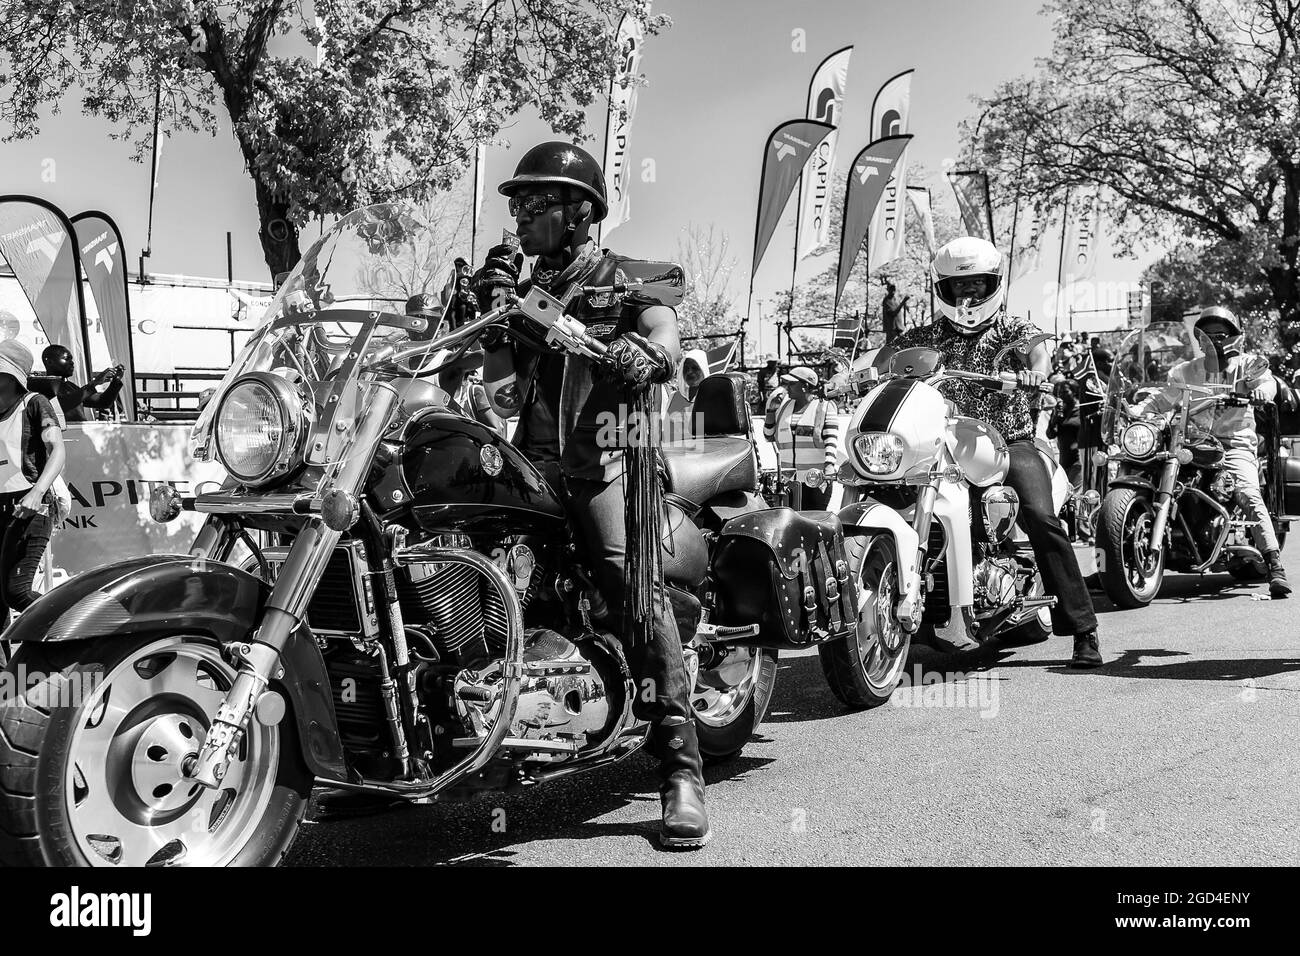 PRETORIA, SOUTH AFRICA - Jan 05, 2021: A grayscale of floats and fancy dress costumes at the Gauteng Carnival in Pretoria, South Africa Stock Photo